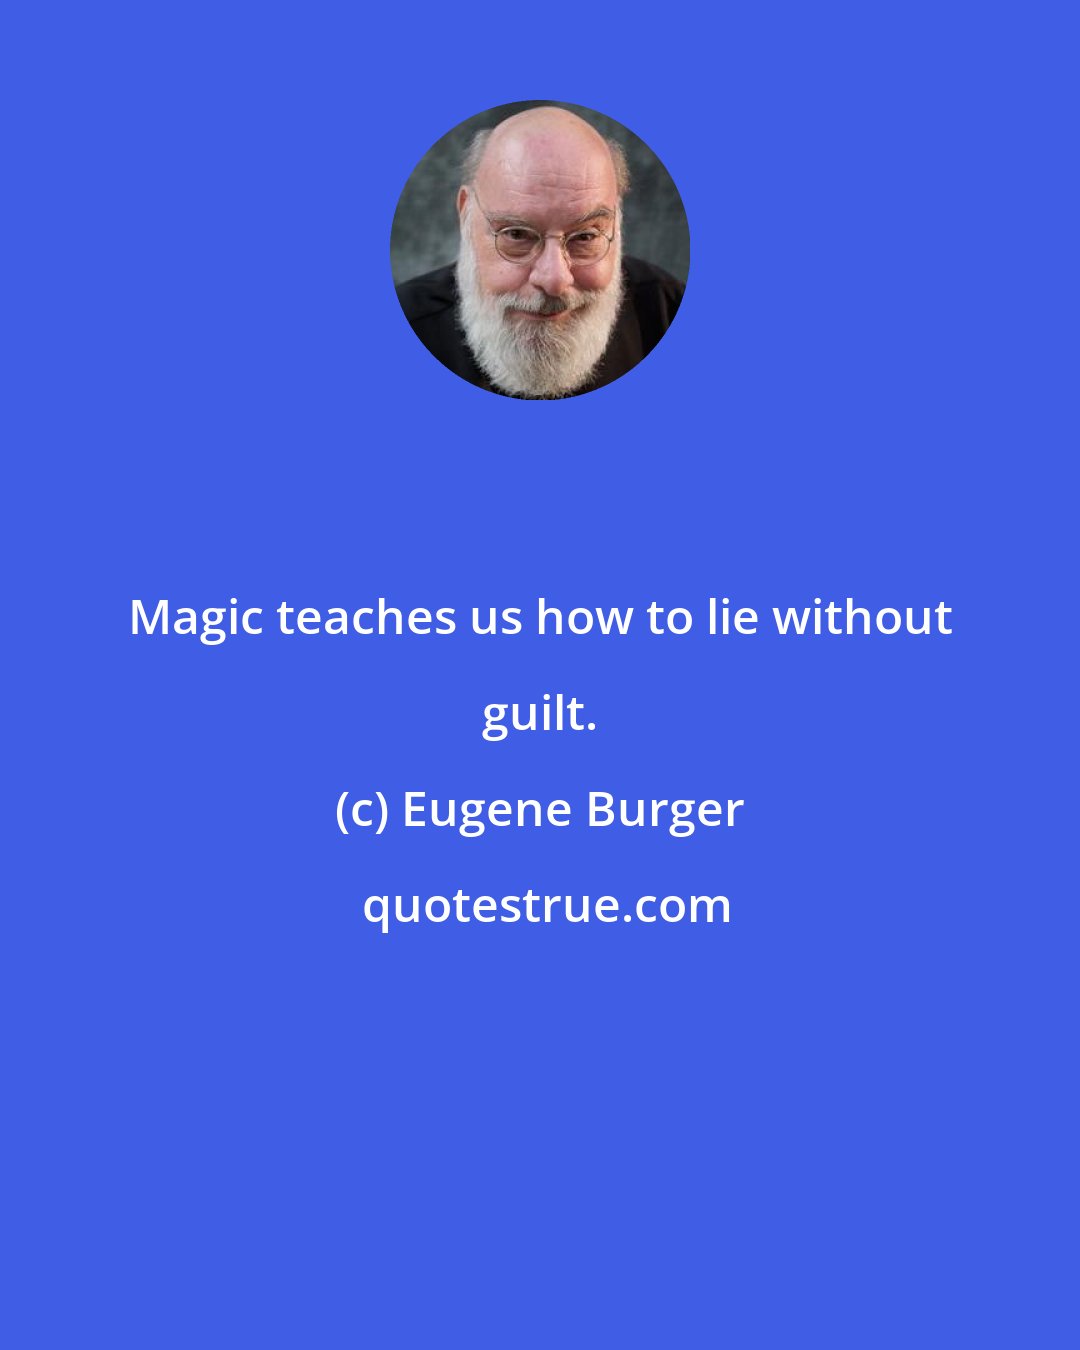 Eugene Burger: Magic teaches us how to lie without guilt.